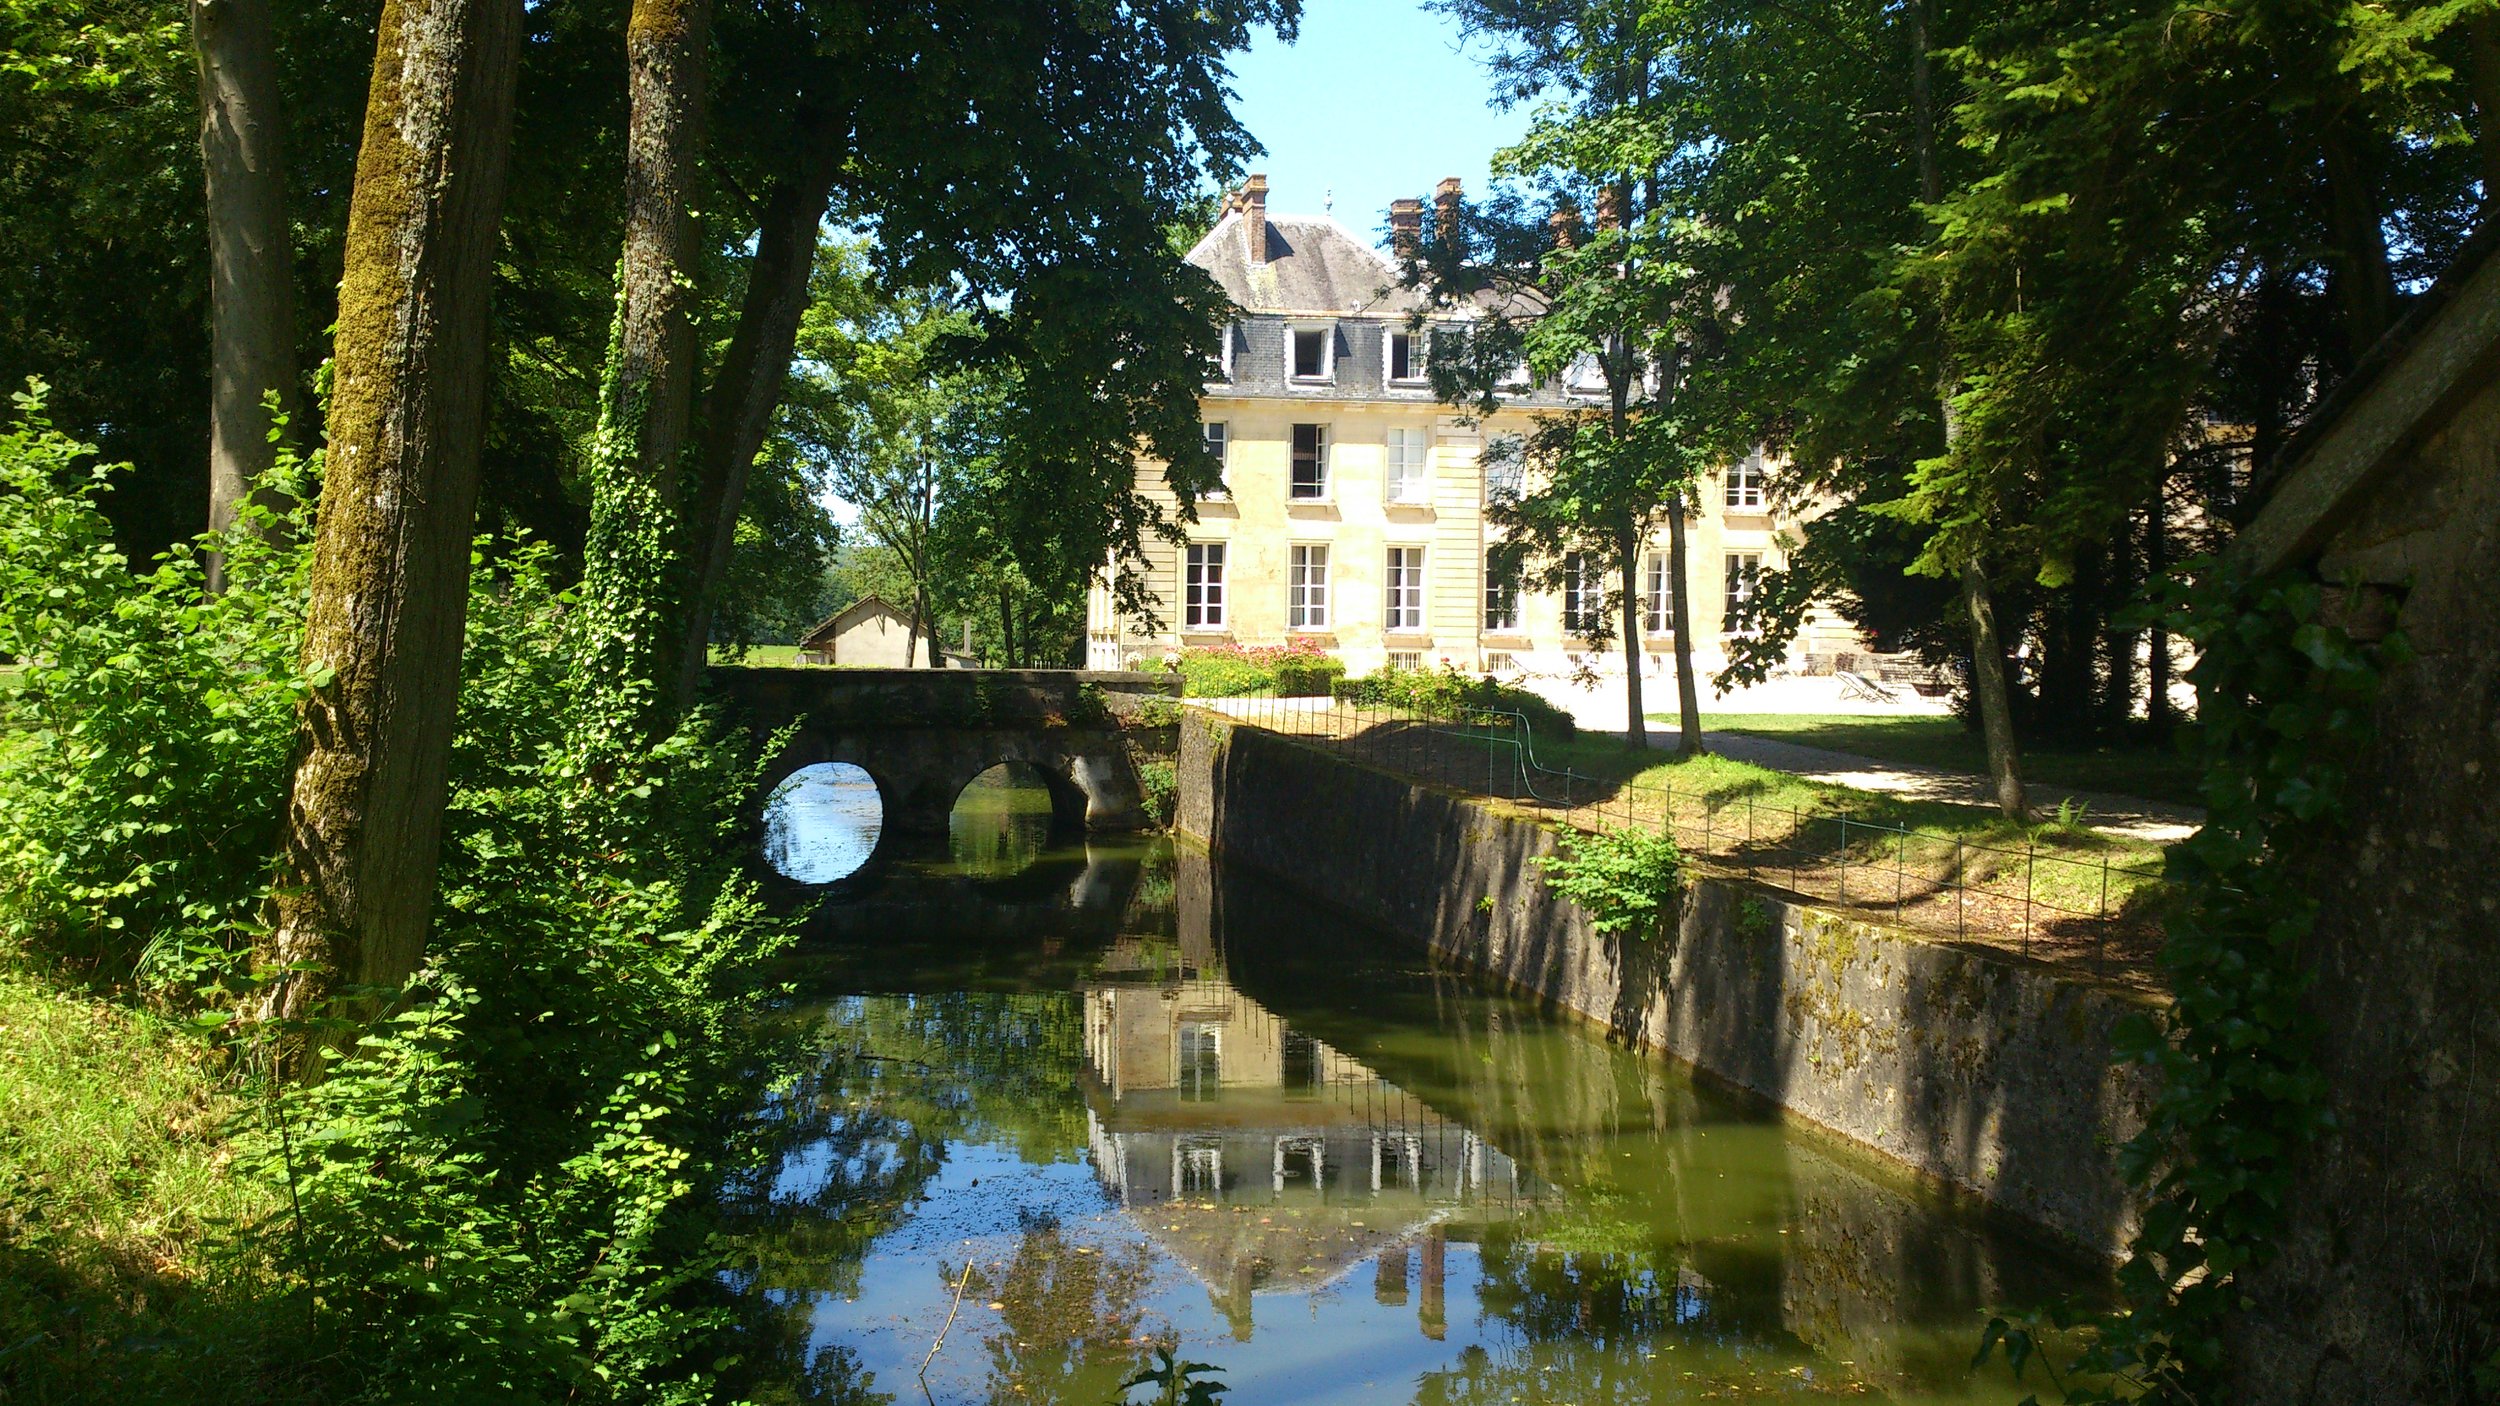 The moat at the rear of Chateau de Courtomer with trees and greenery